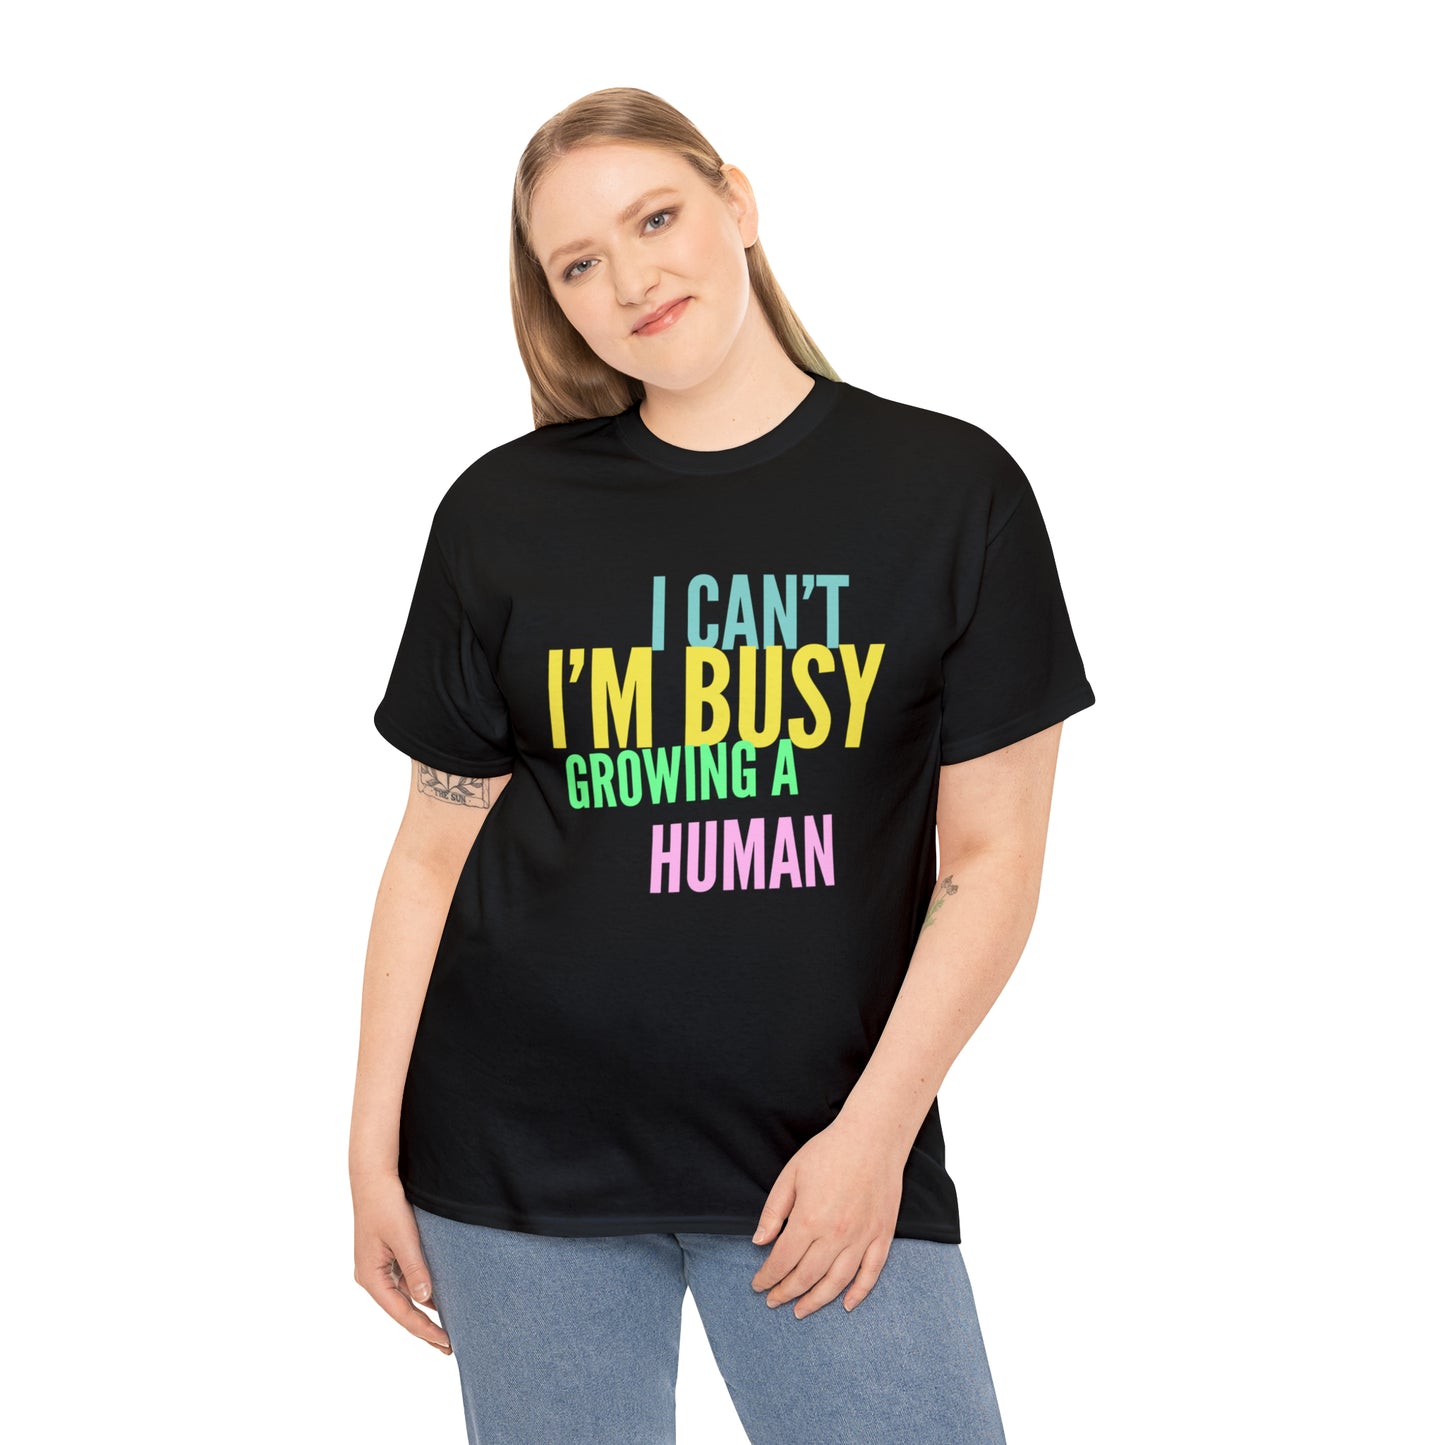 Unique "I CAN'T I'M BUSY GROWING A HUMAN" shirt